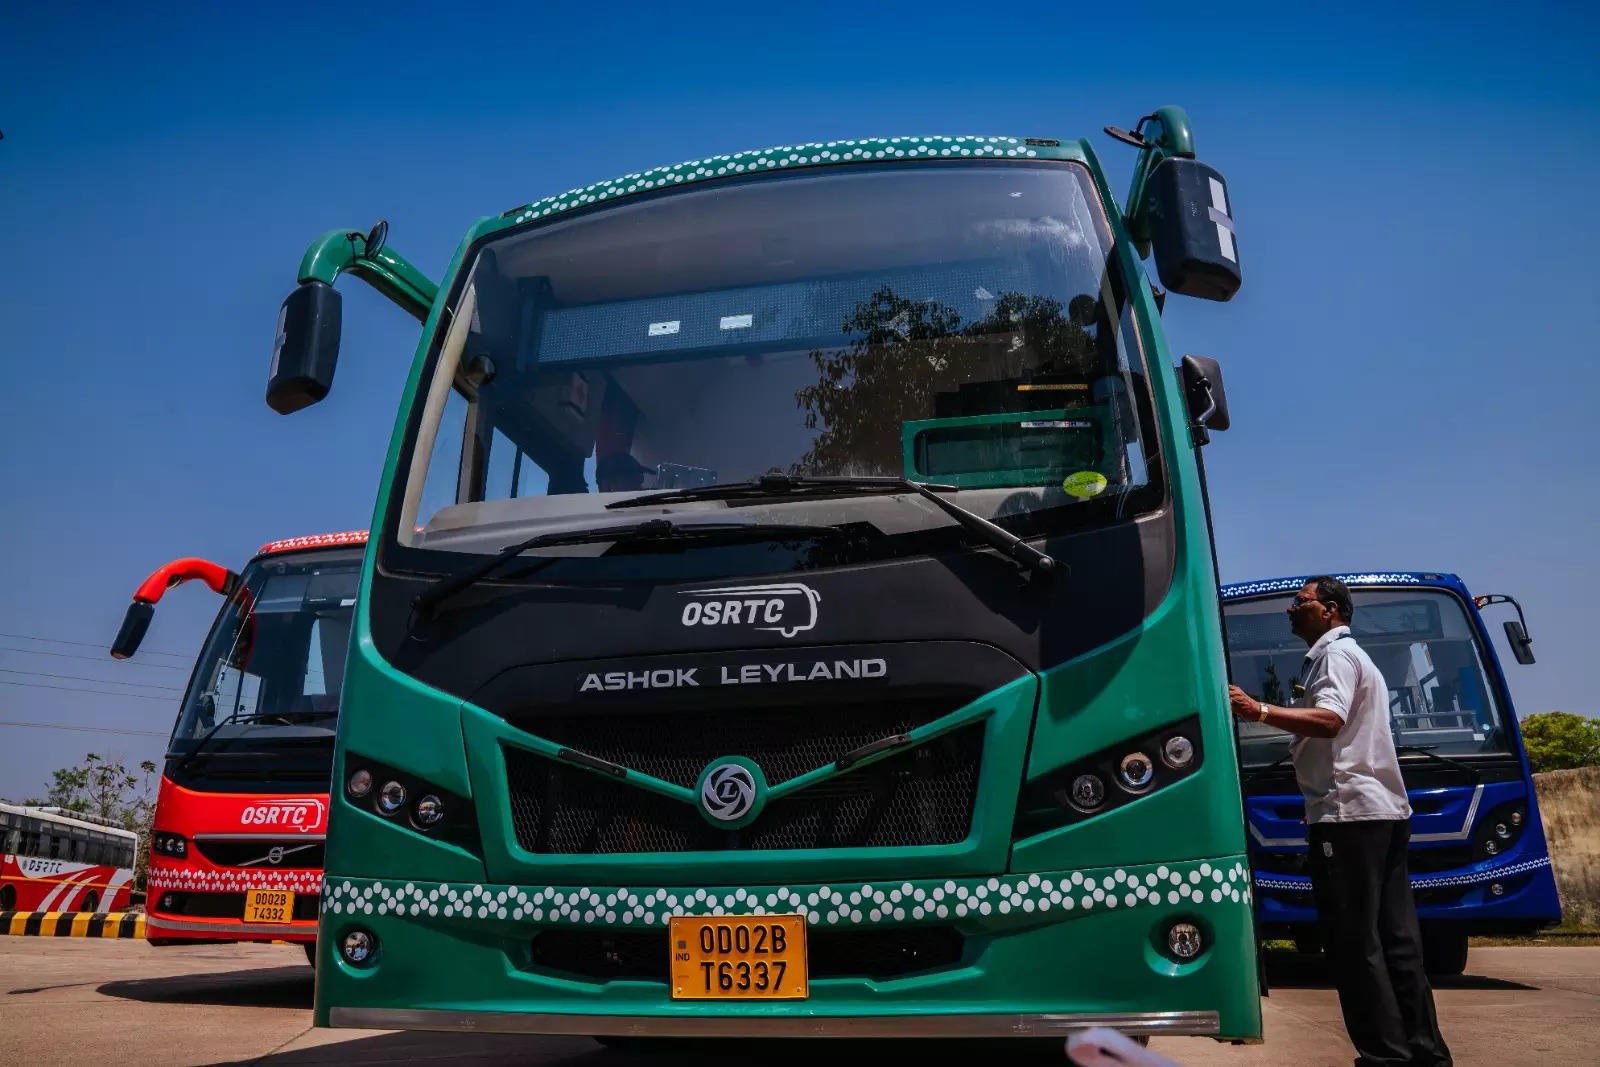 <p>The state transport also has its own Integrated Transport Management System (ITMS) that helps optimize route planning, reduce congestion, and improve fuel efficiency, the release said.</p>